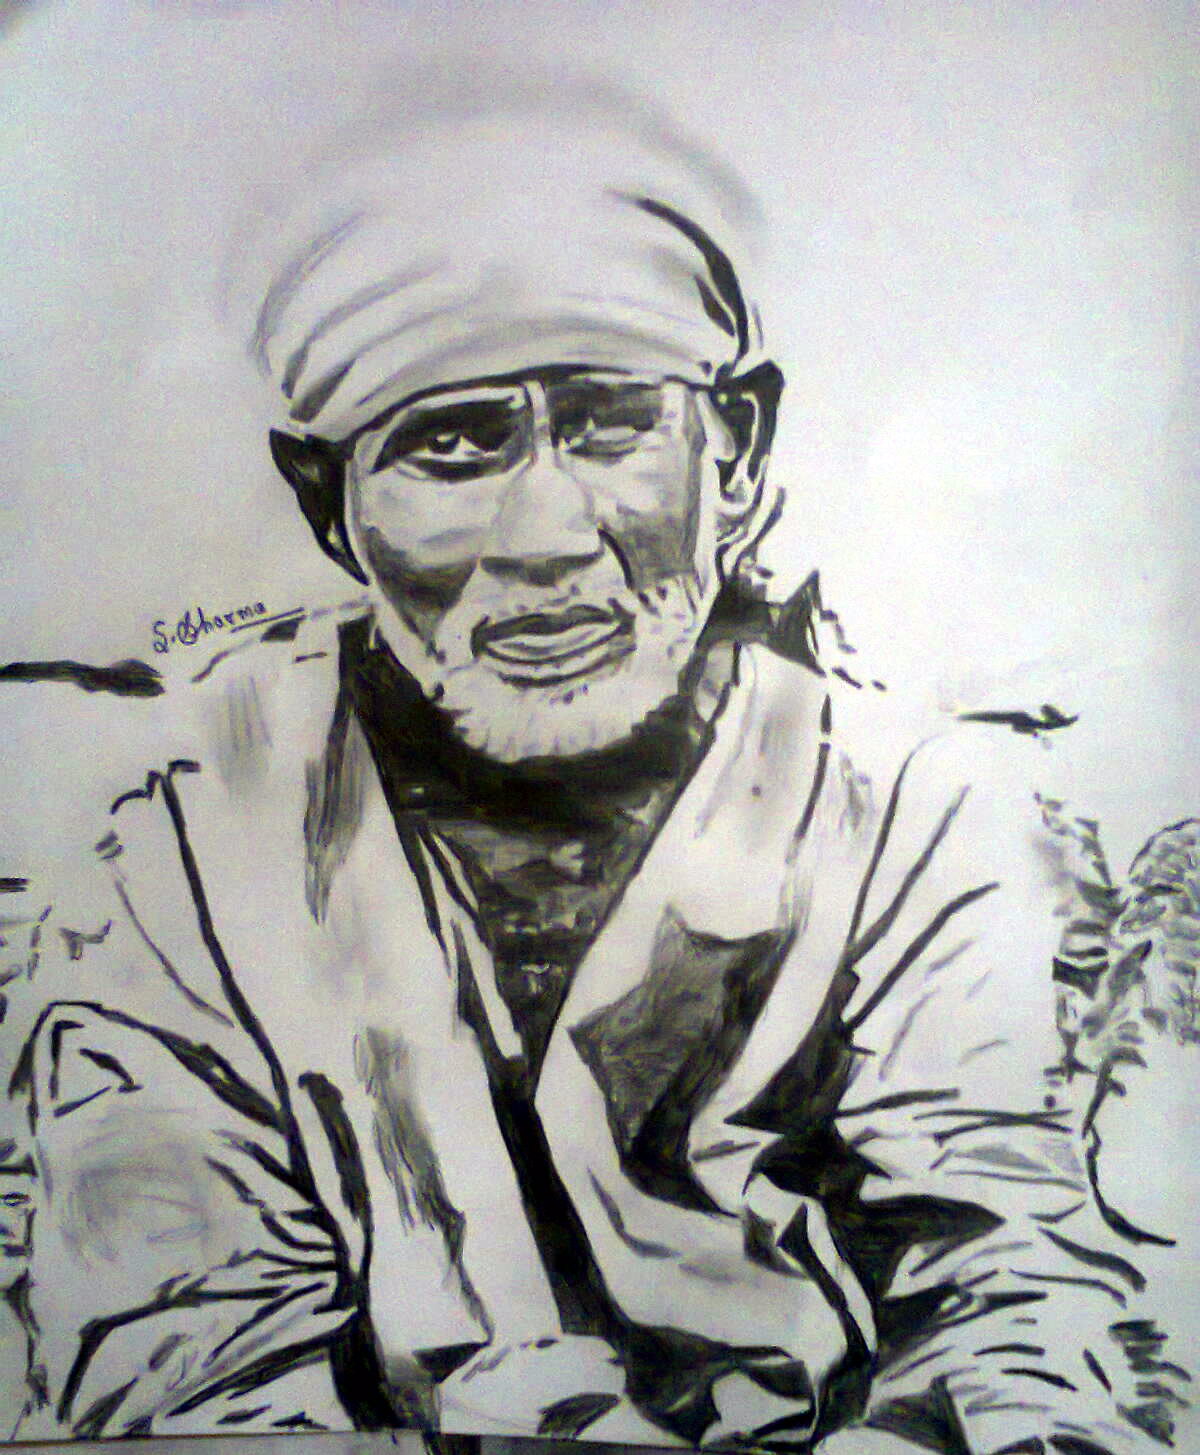 pencil sketch of sai baba by SimpleArtfou on DeviantArt